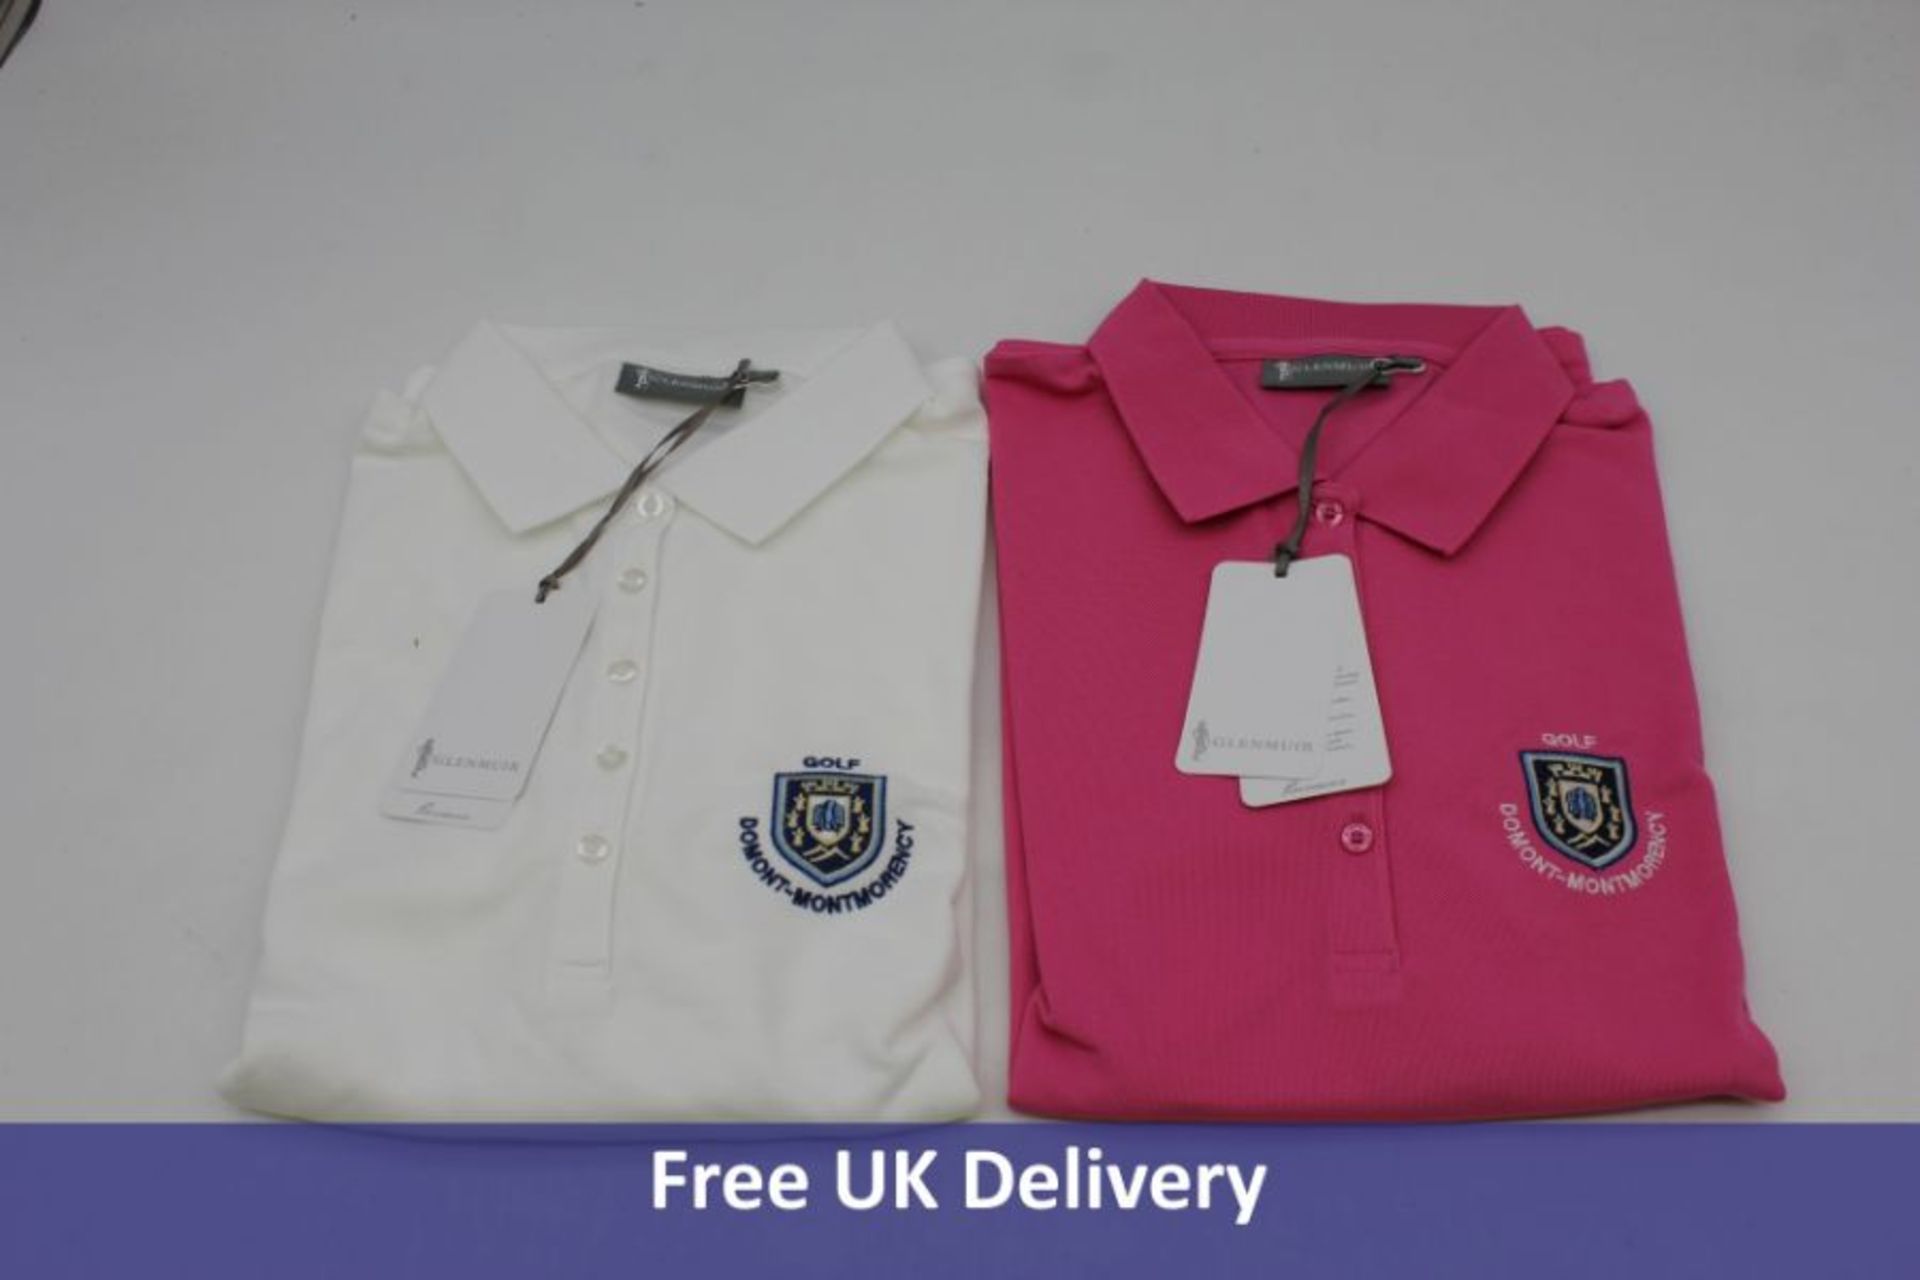 Six Glenmuir Ladies Misha Performance Pique Long Sleeve Golf Polo Tops, 1x Hot Pink, L, 1x White, L, - Image 2 of 3